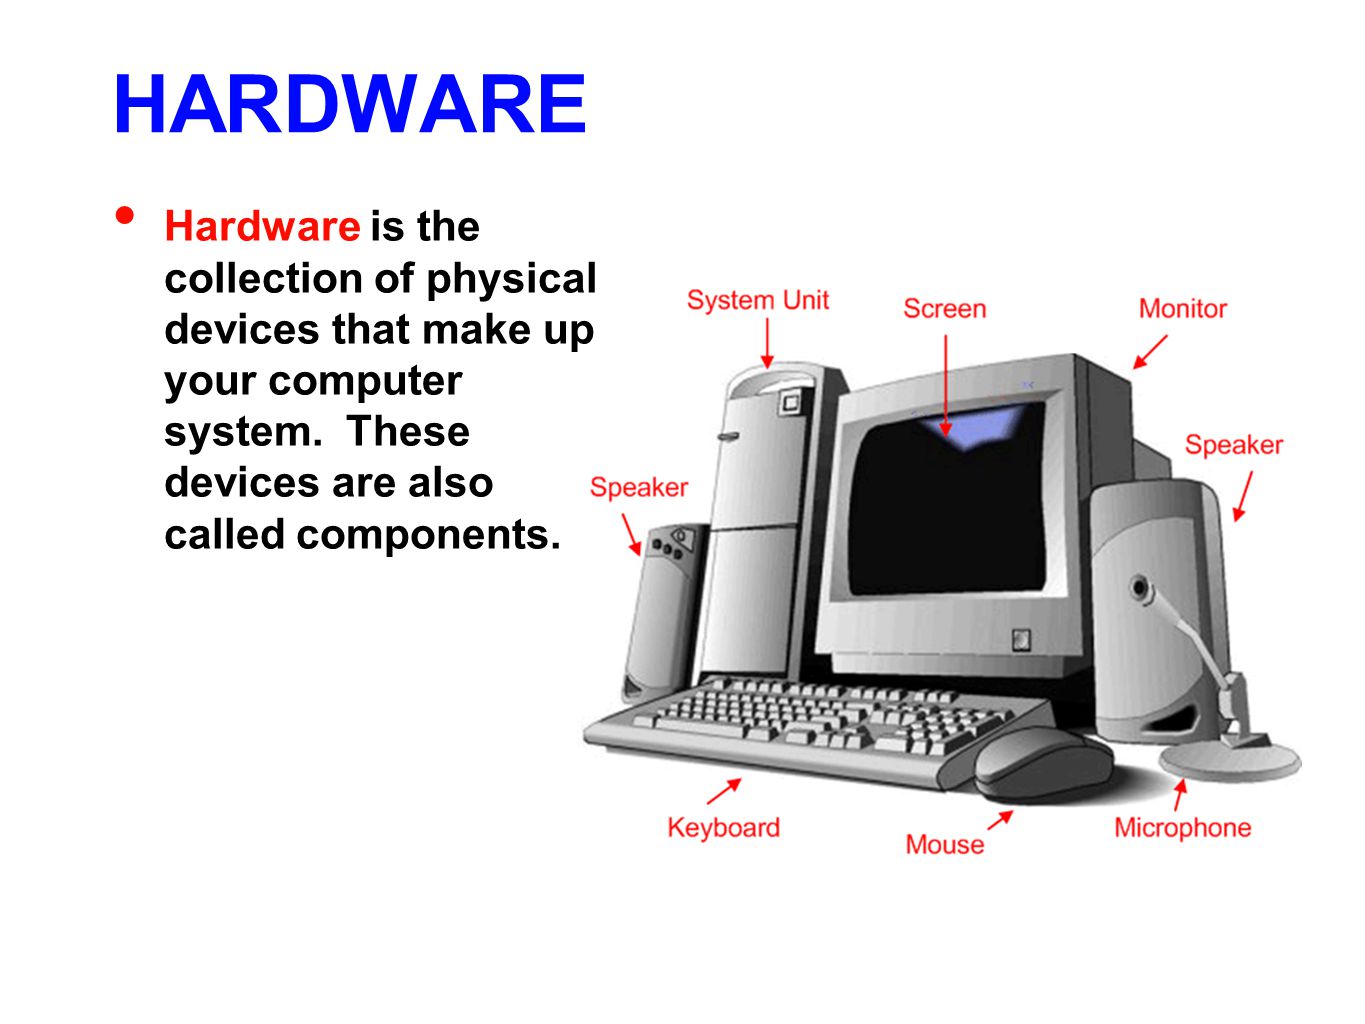 What is Hardware